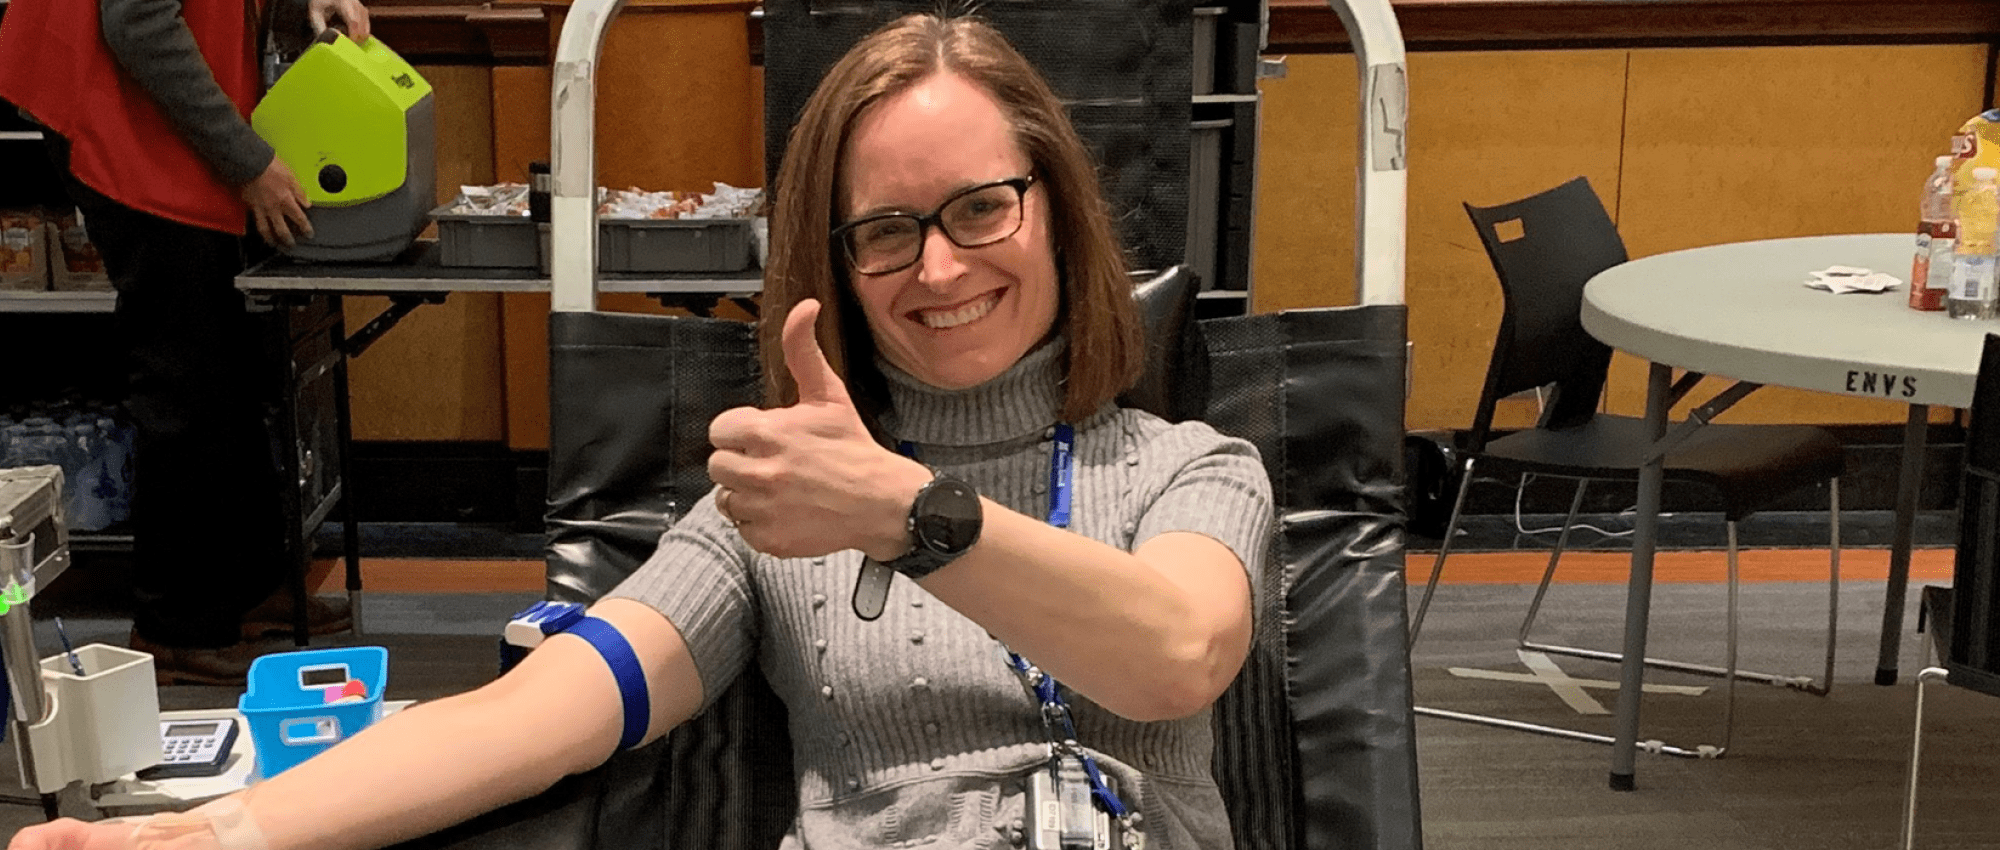 Doctors bracing for the impact of COVID-19 are finding time to give blood and encourage others to do the same.